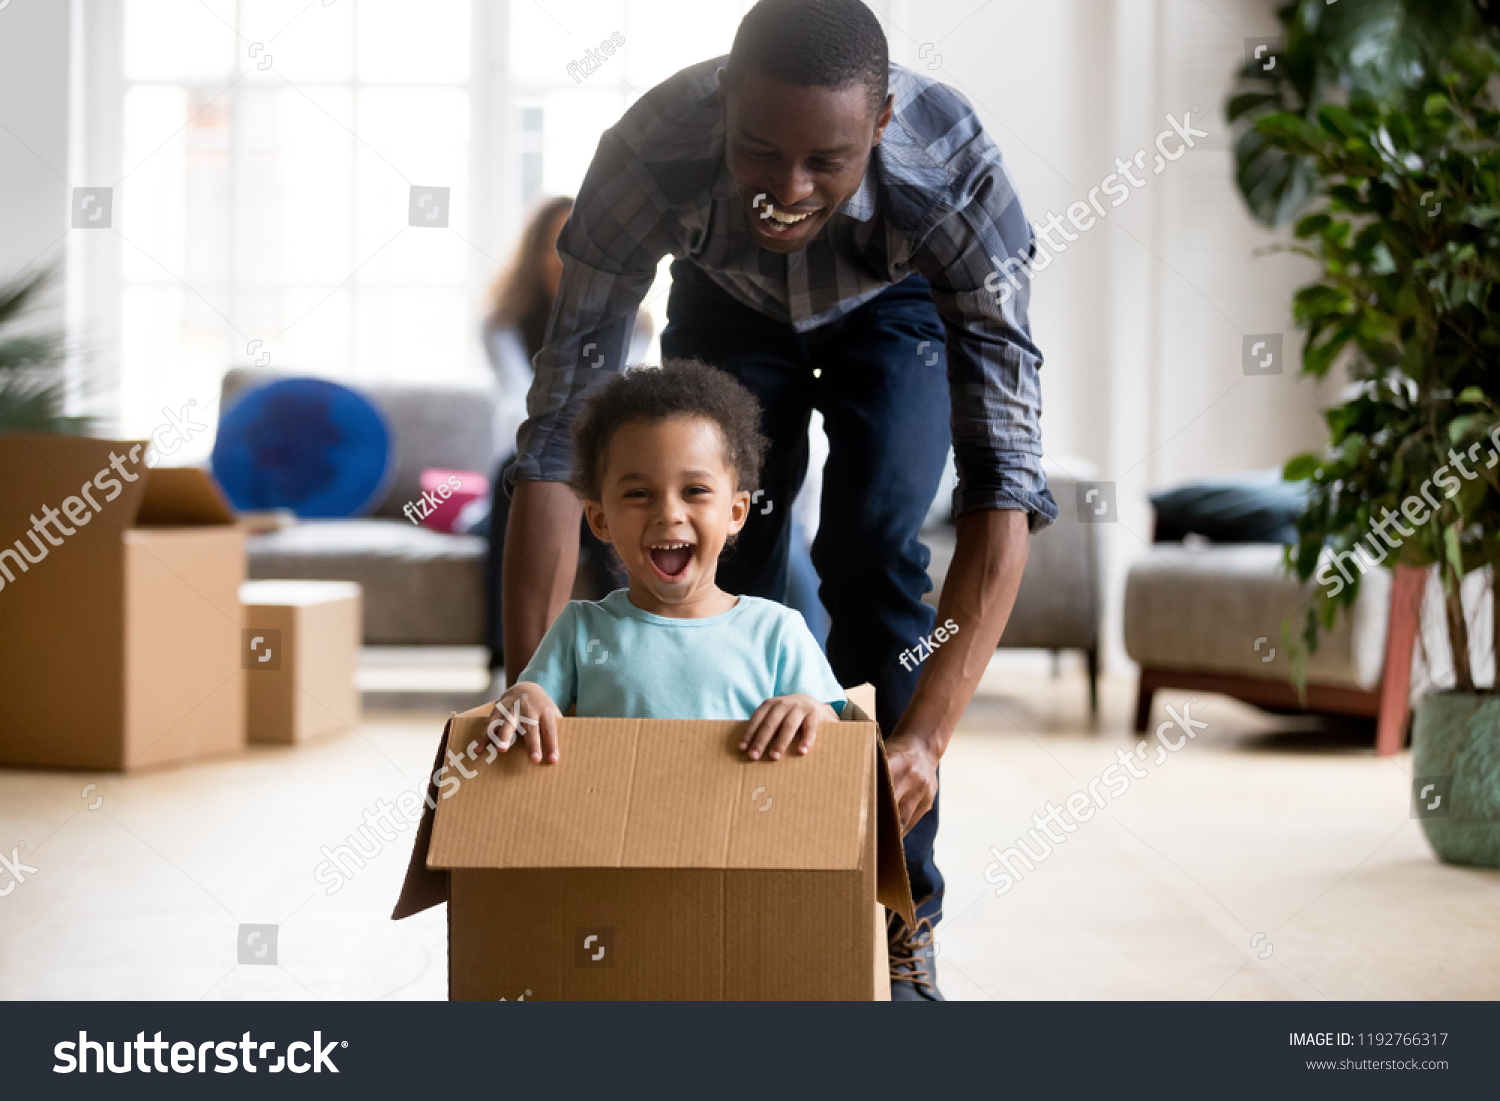 Black family in living room have a fun spend time at new home. African adorable playful laughing boy sitting at cardboard box, father rolling him playing together. New property and relocation concept #1192766317